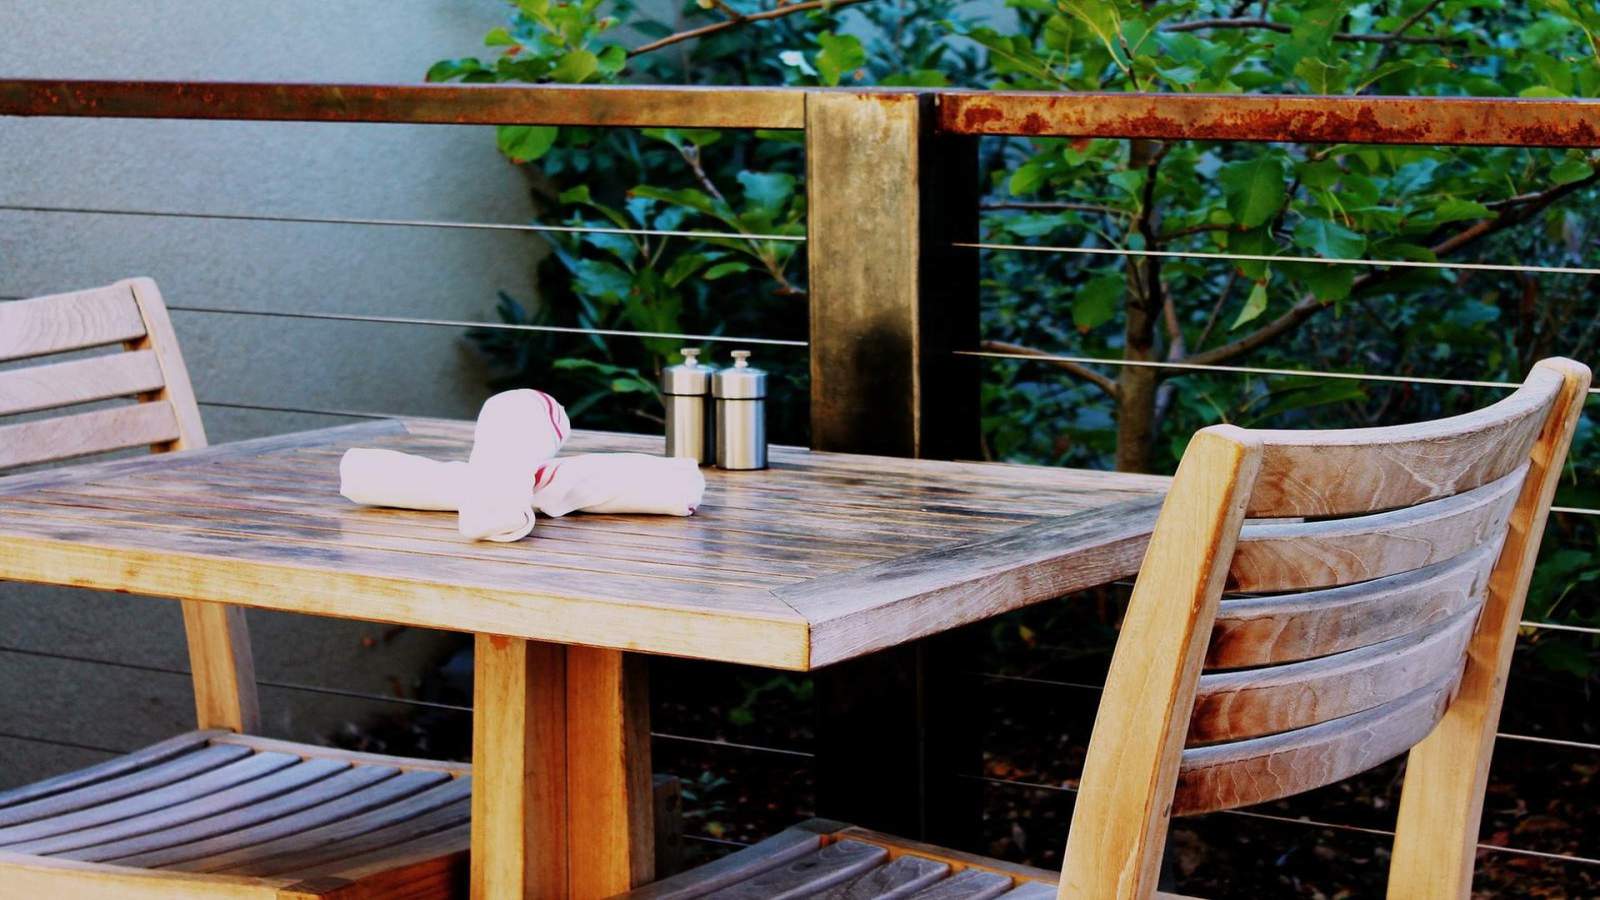 A guide to eating outdoors in the Houston area: 12 patios perfect for socially distanced dining